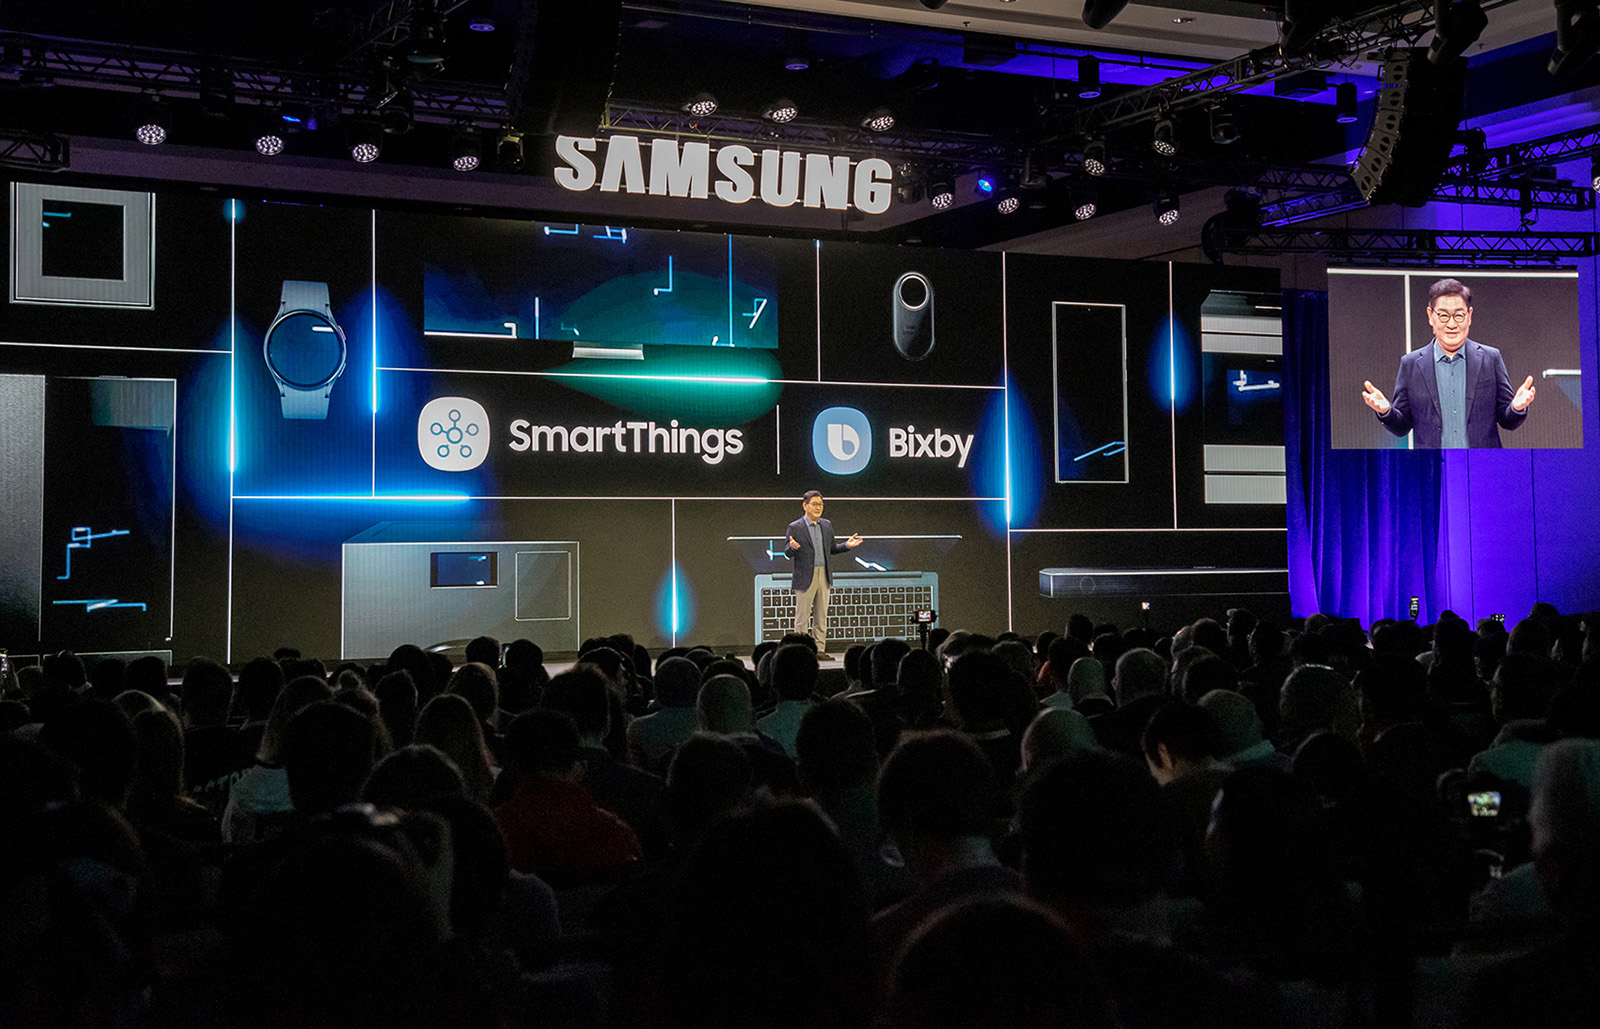 Samsung's Press Conference at CES 2024